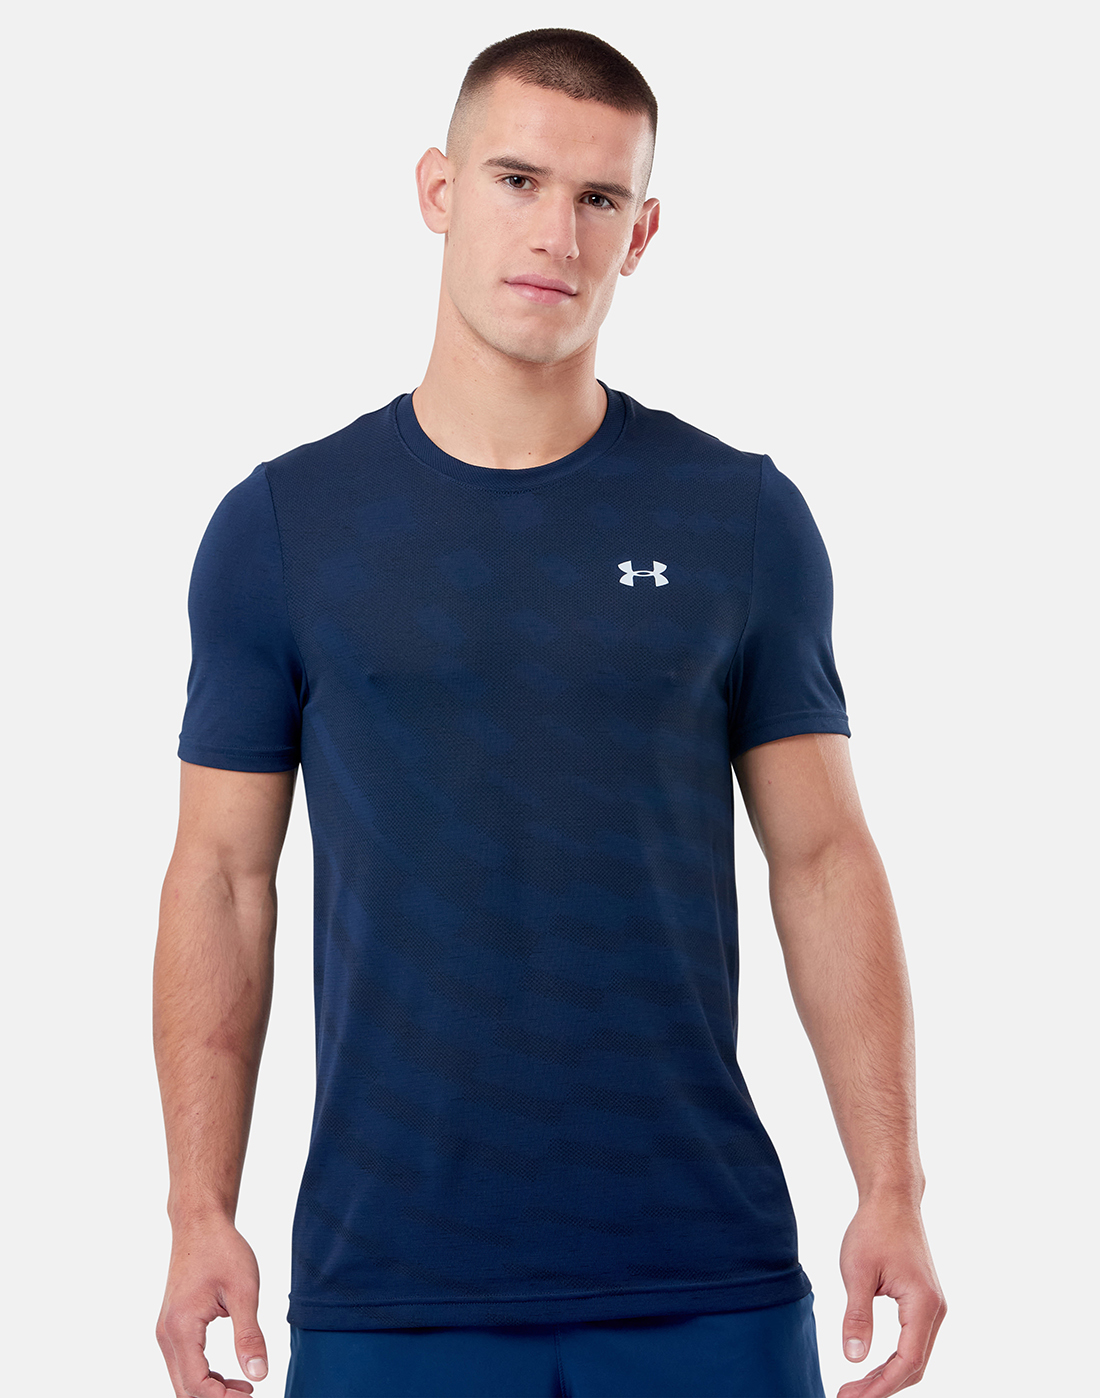 Under Armour Mens Seamless Radial T-Shirt - Black | Life Style Sports IE